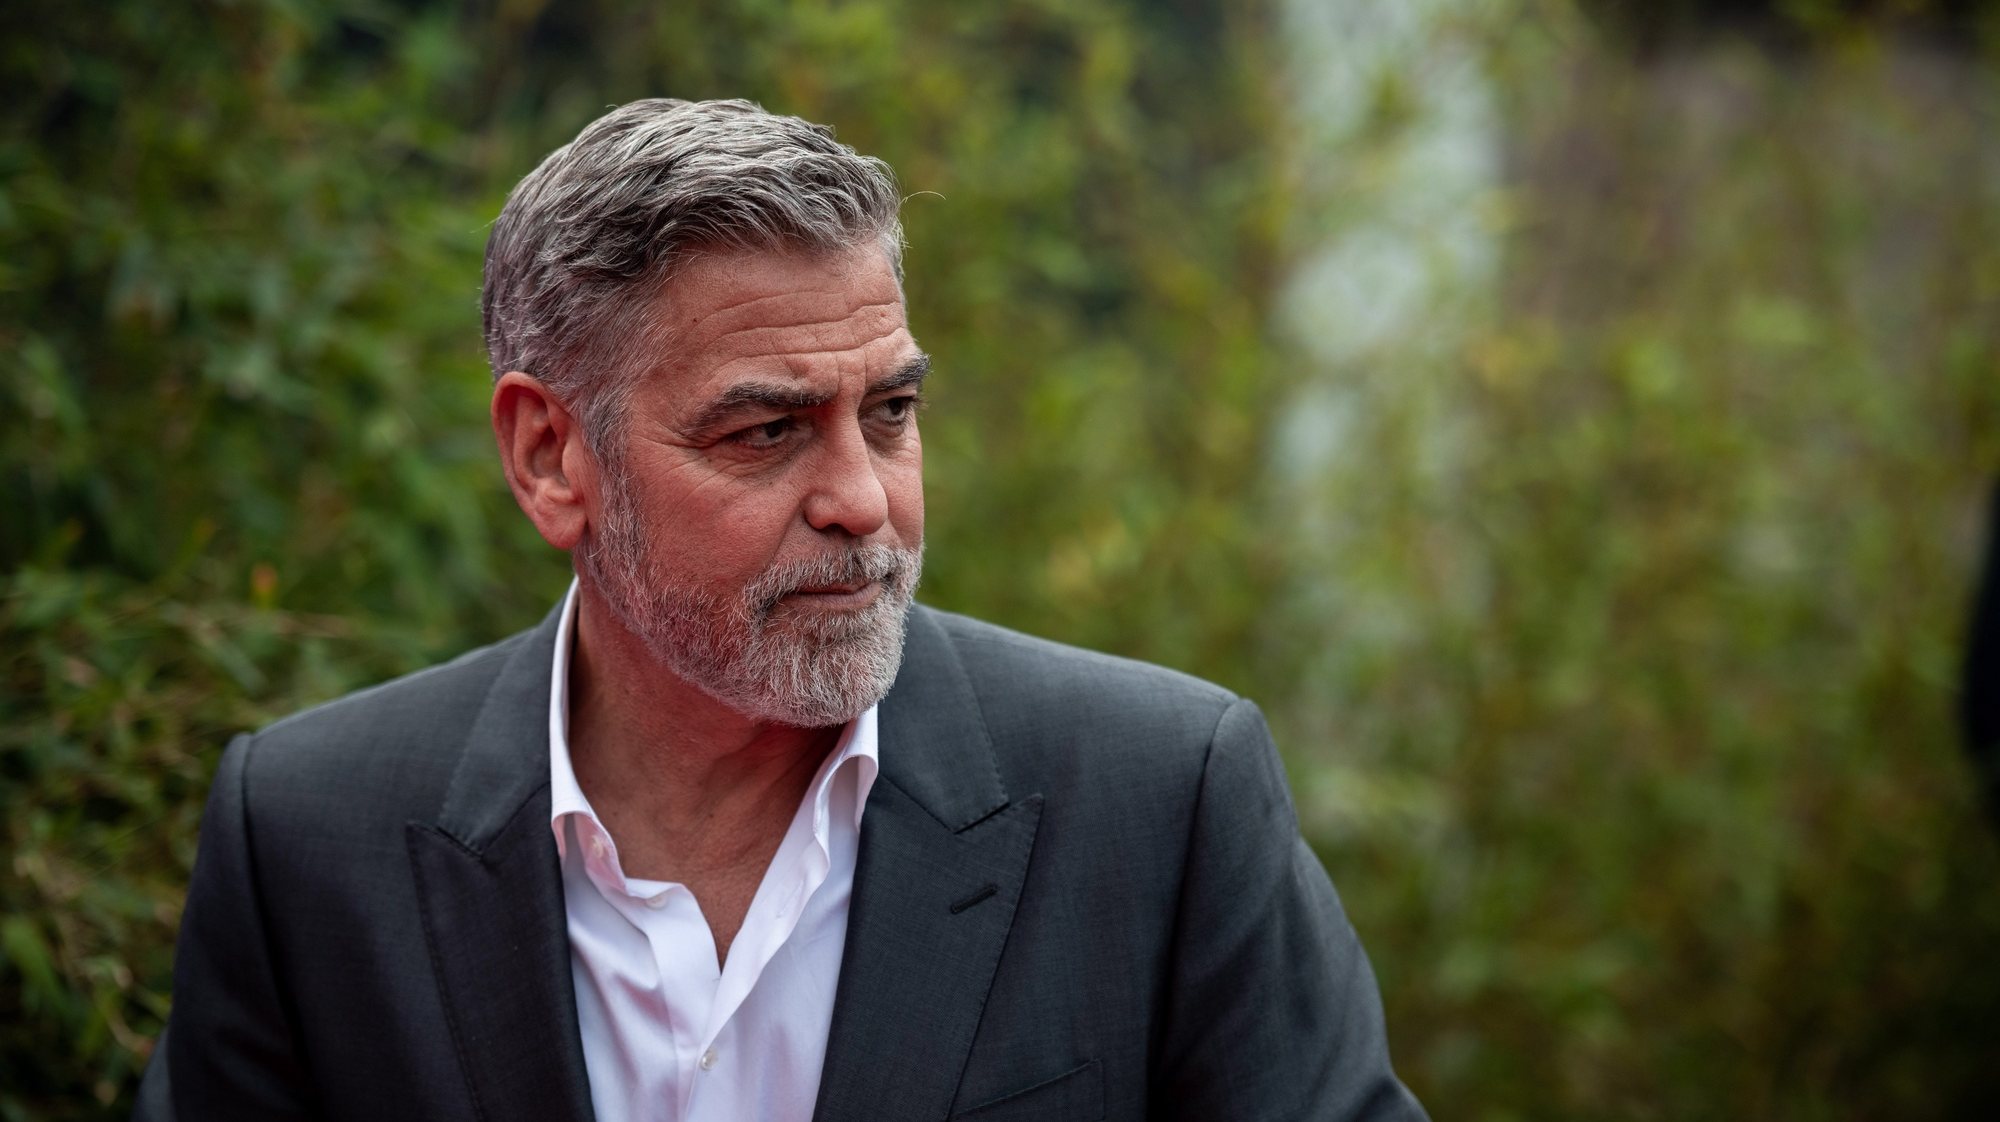 epa10650706 US actor George Clooney attends the German Postcode Lottery Charity Gala 2023 in Duesseldorf, Germany, 23 May 2023. Clooney is the International Ambassador for the Postcode Lottery Group. German Postcode Lottery was founded in 2016 and is collecting money for charity purposes.  EPA/FABIAN STRAUCH